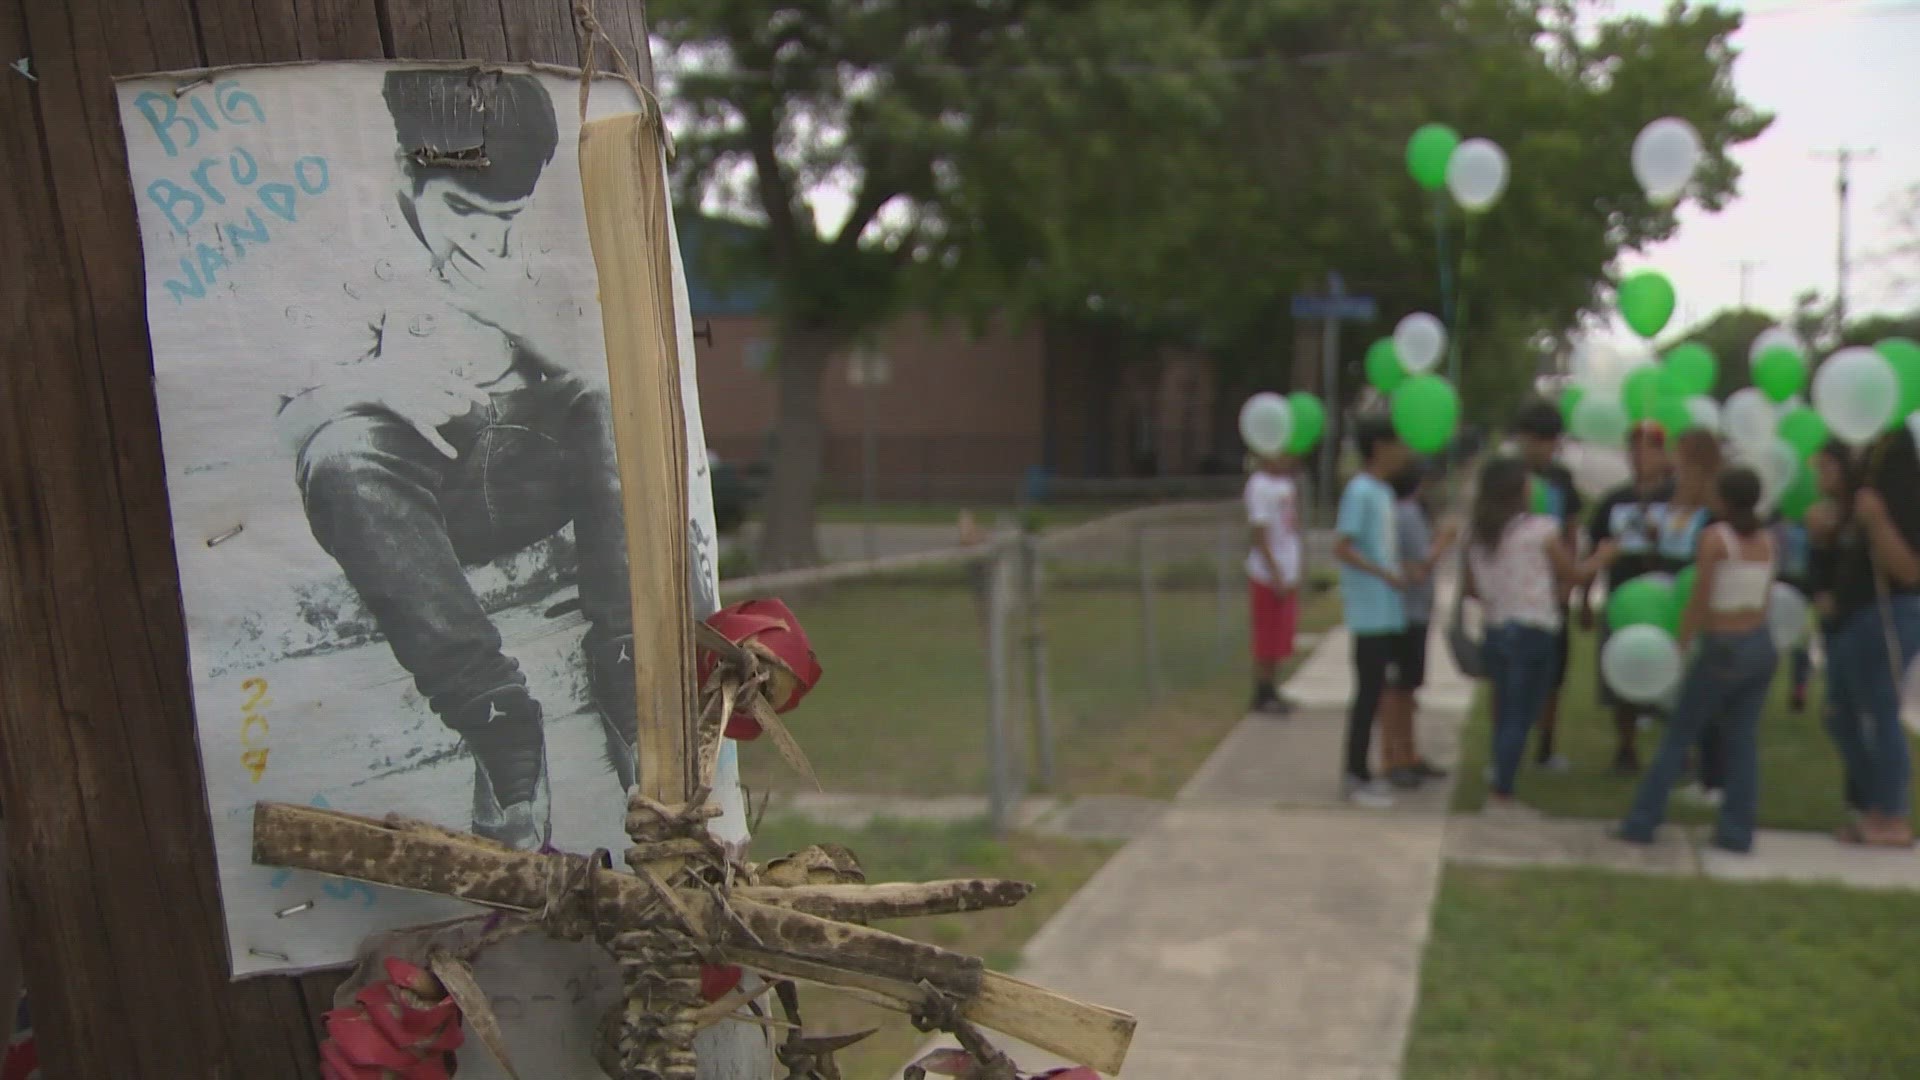 It's been seven months since Humberto Kalias Perales' death, and his family still don't know who killed him.